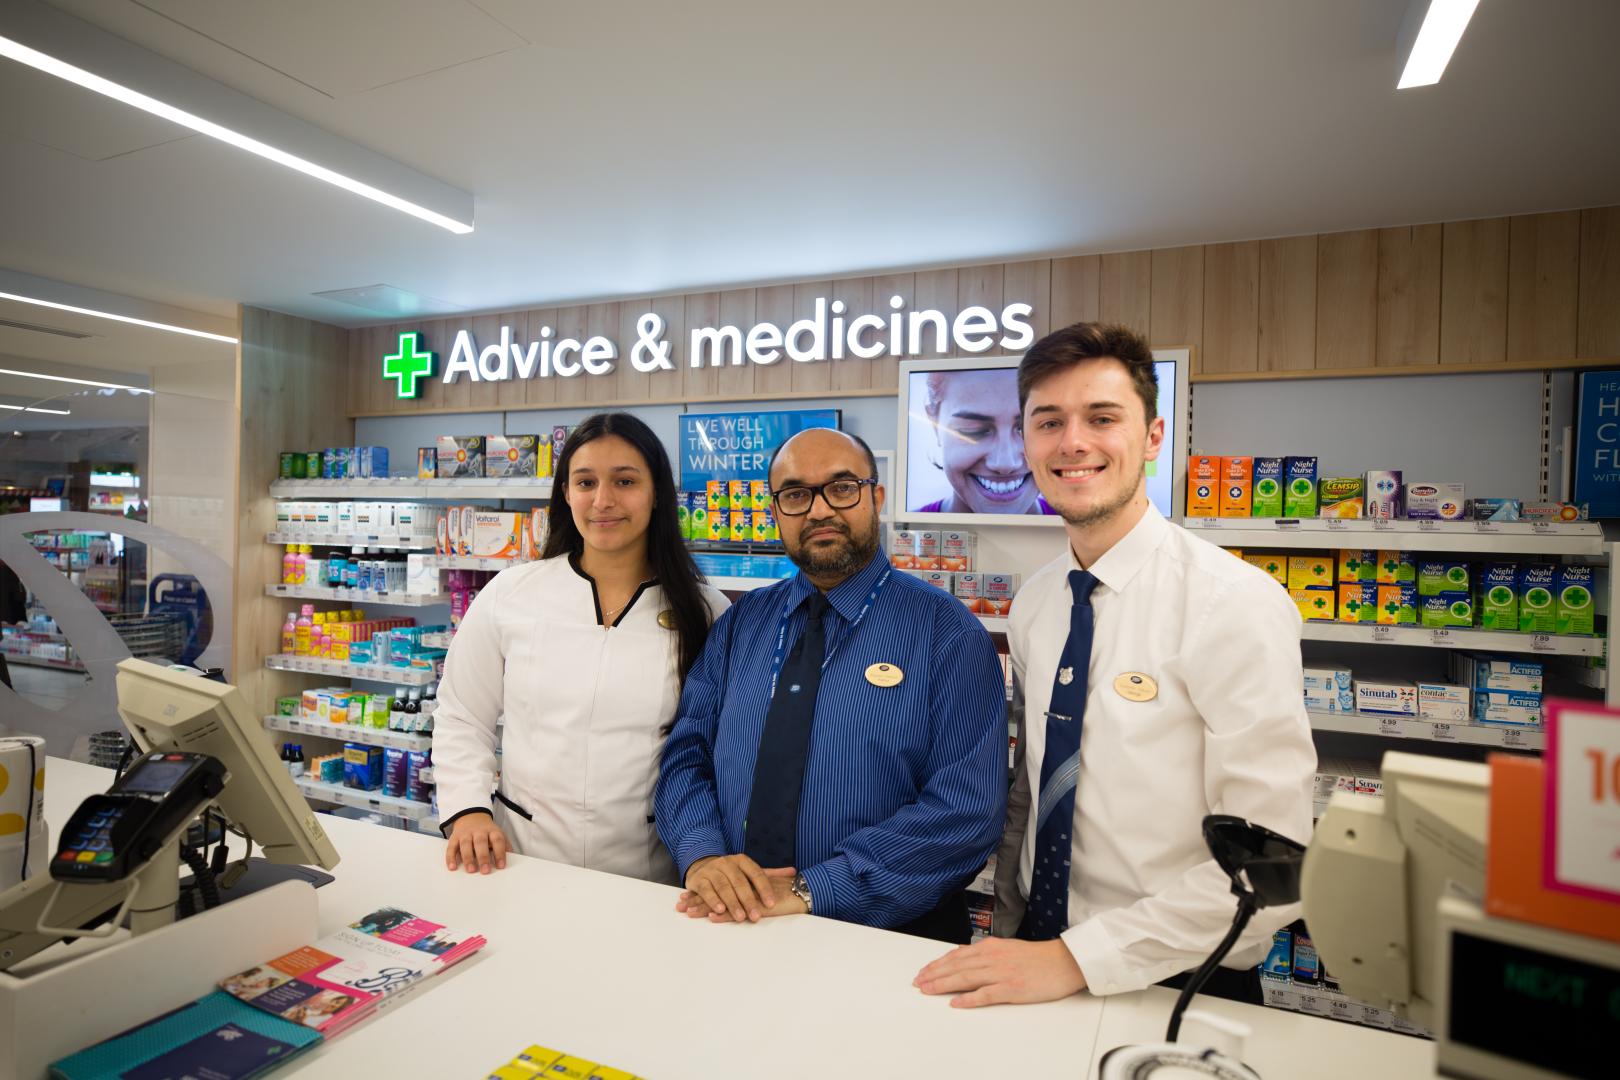 Boots opticians and pharmacists at checkout counter